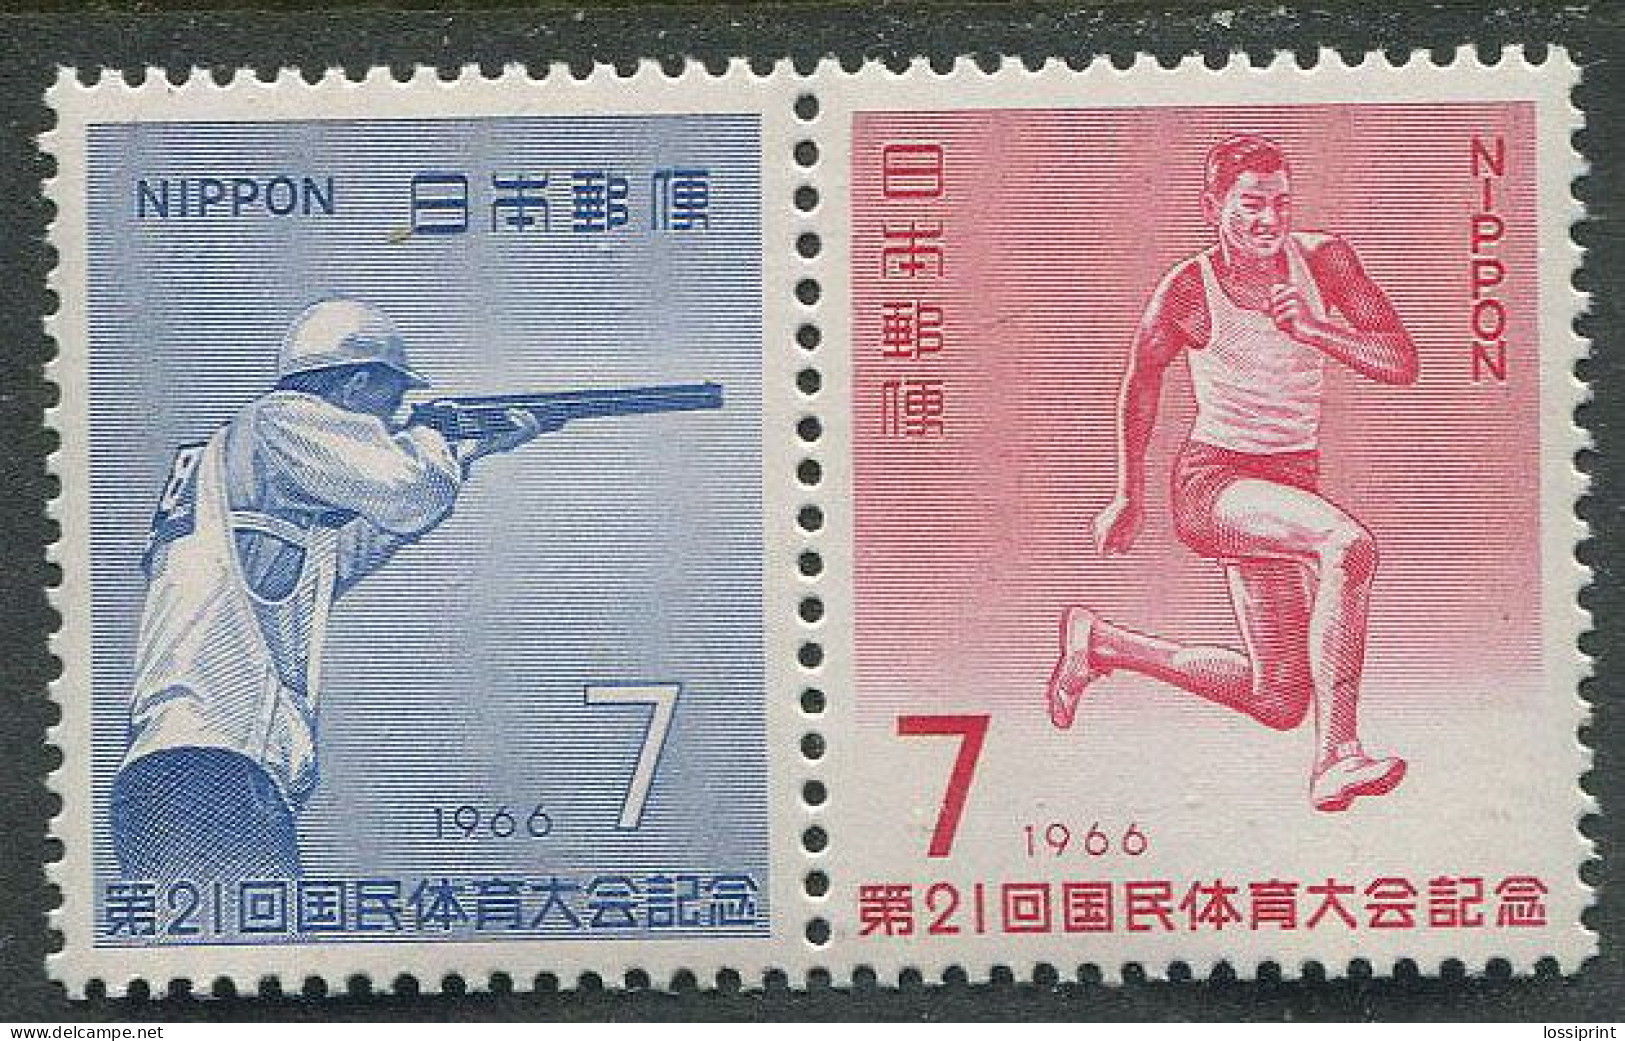 Japan:Unused Stamps Shooting And Running, 1966, MNH - Waffenschiessen